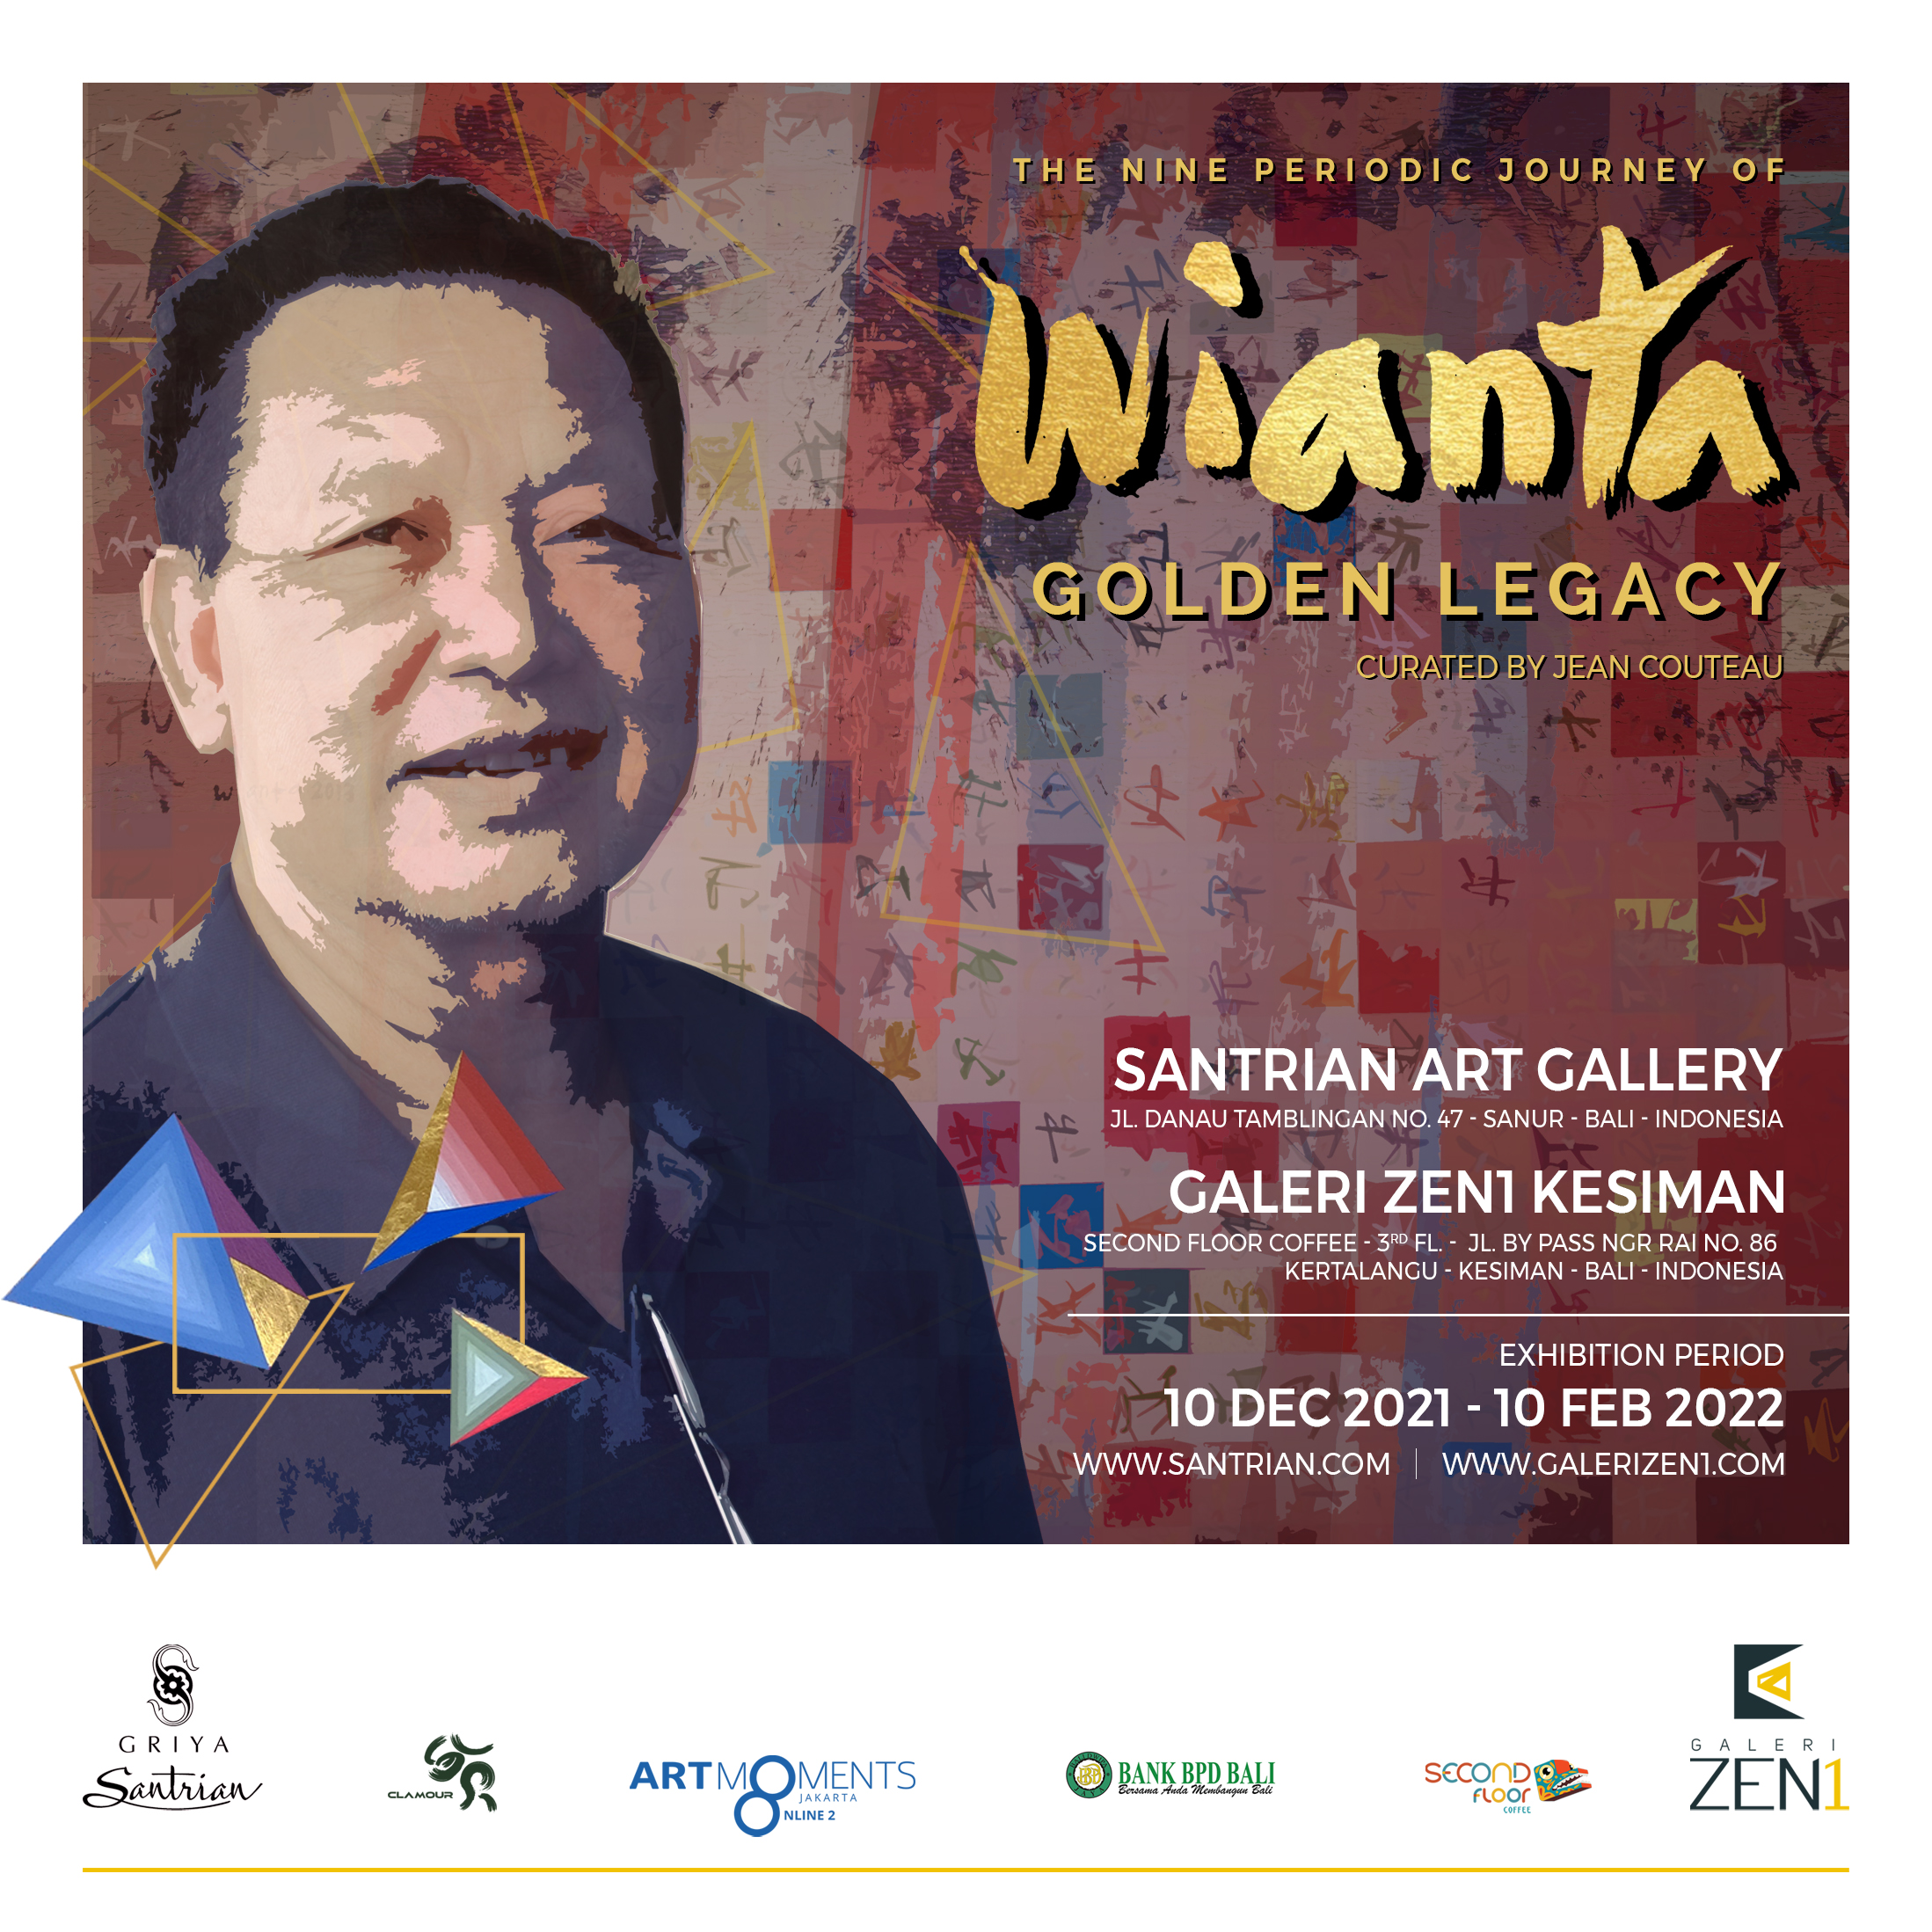 The Nine Periodic Journey of Made Wianta – Golden Legacy